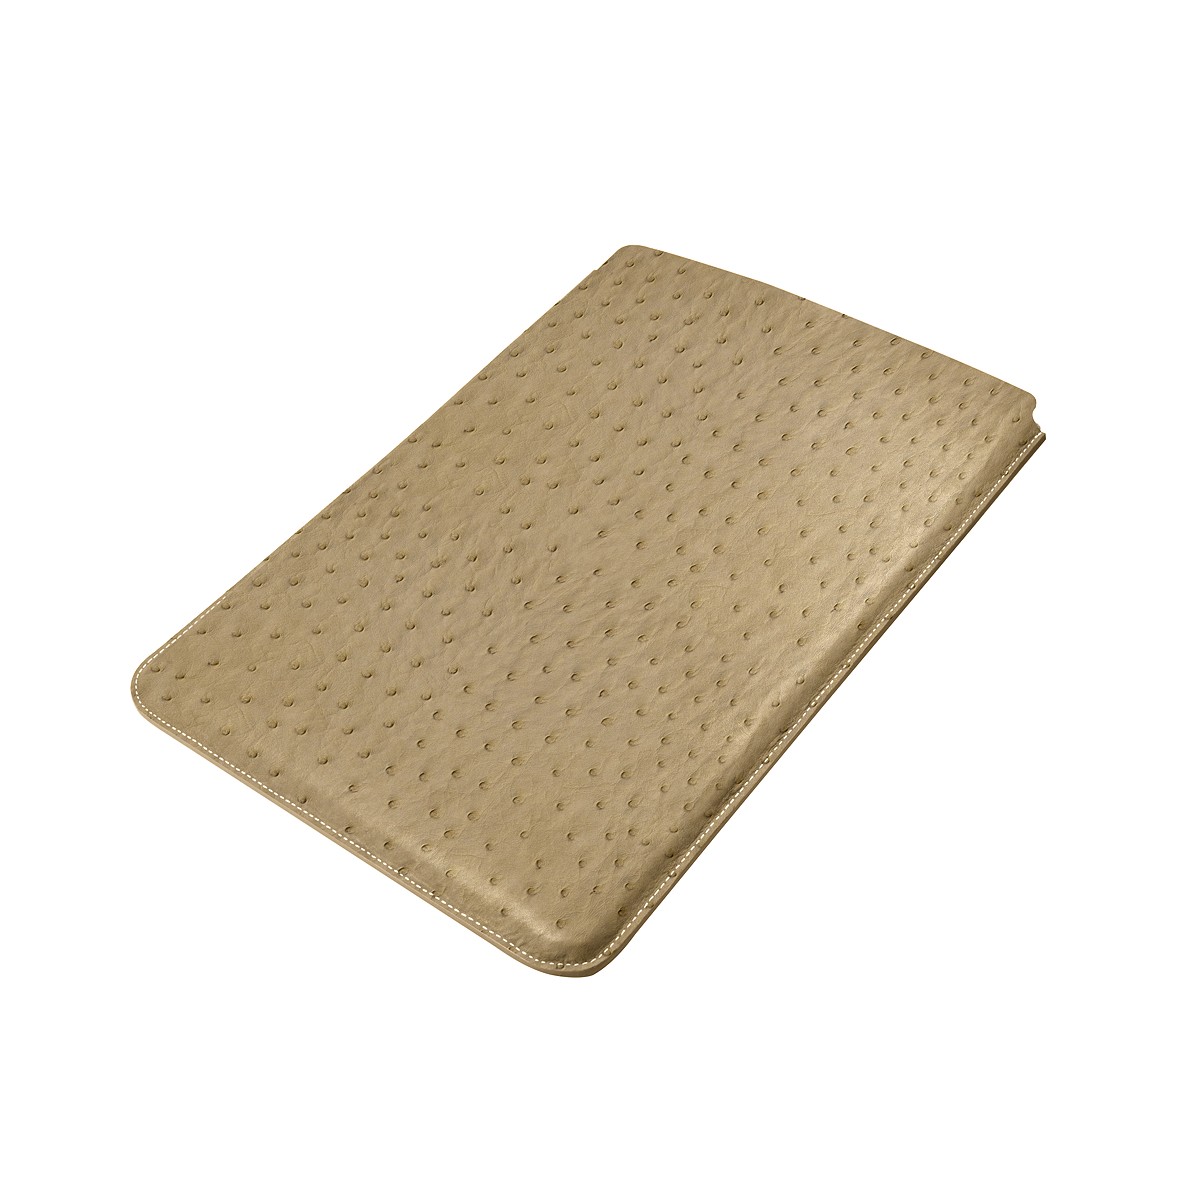 Lucrin Case for Microsoft Surface Pro 3 Real Ostrich Leather | eBay